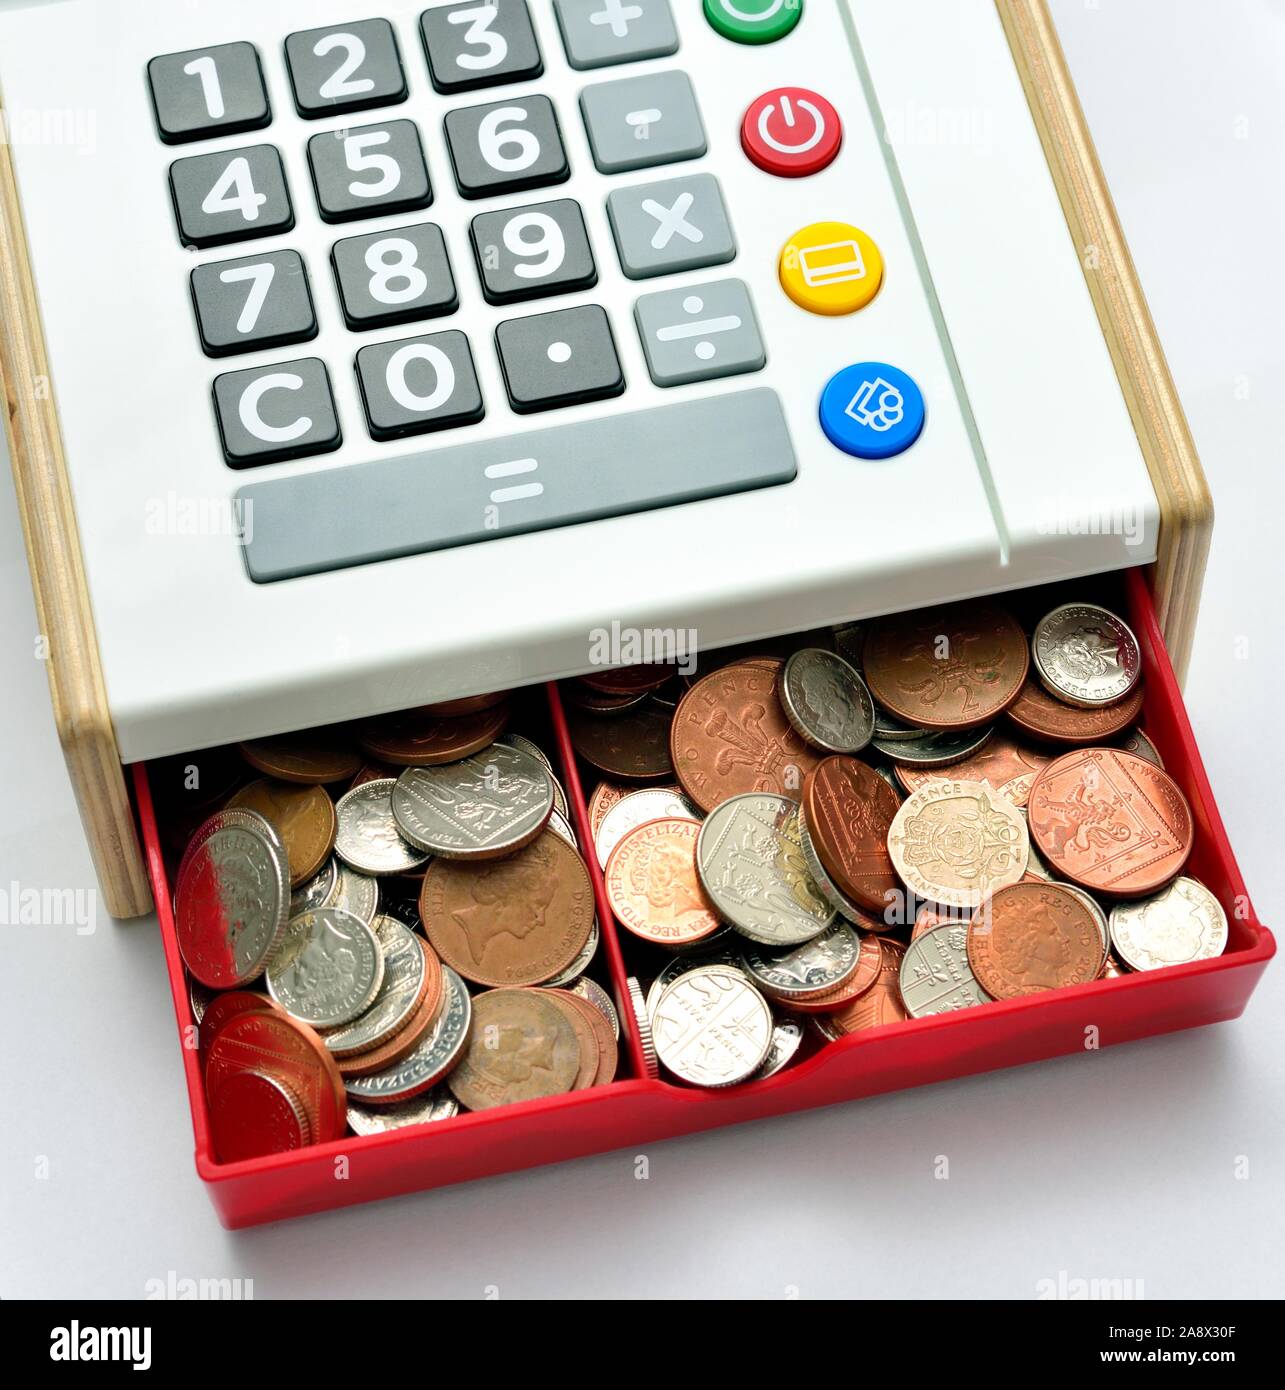 Cash Till High Resolution Stock Photography and Images - Alamy